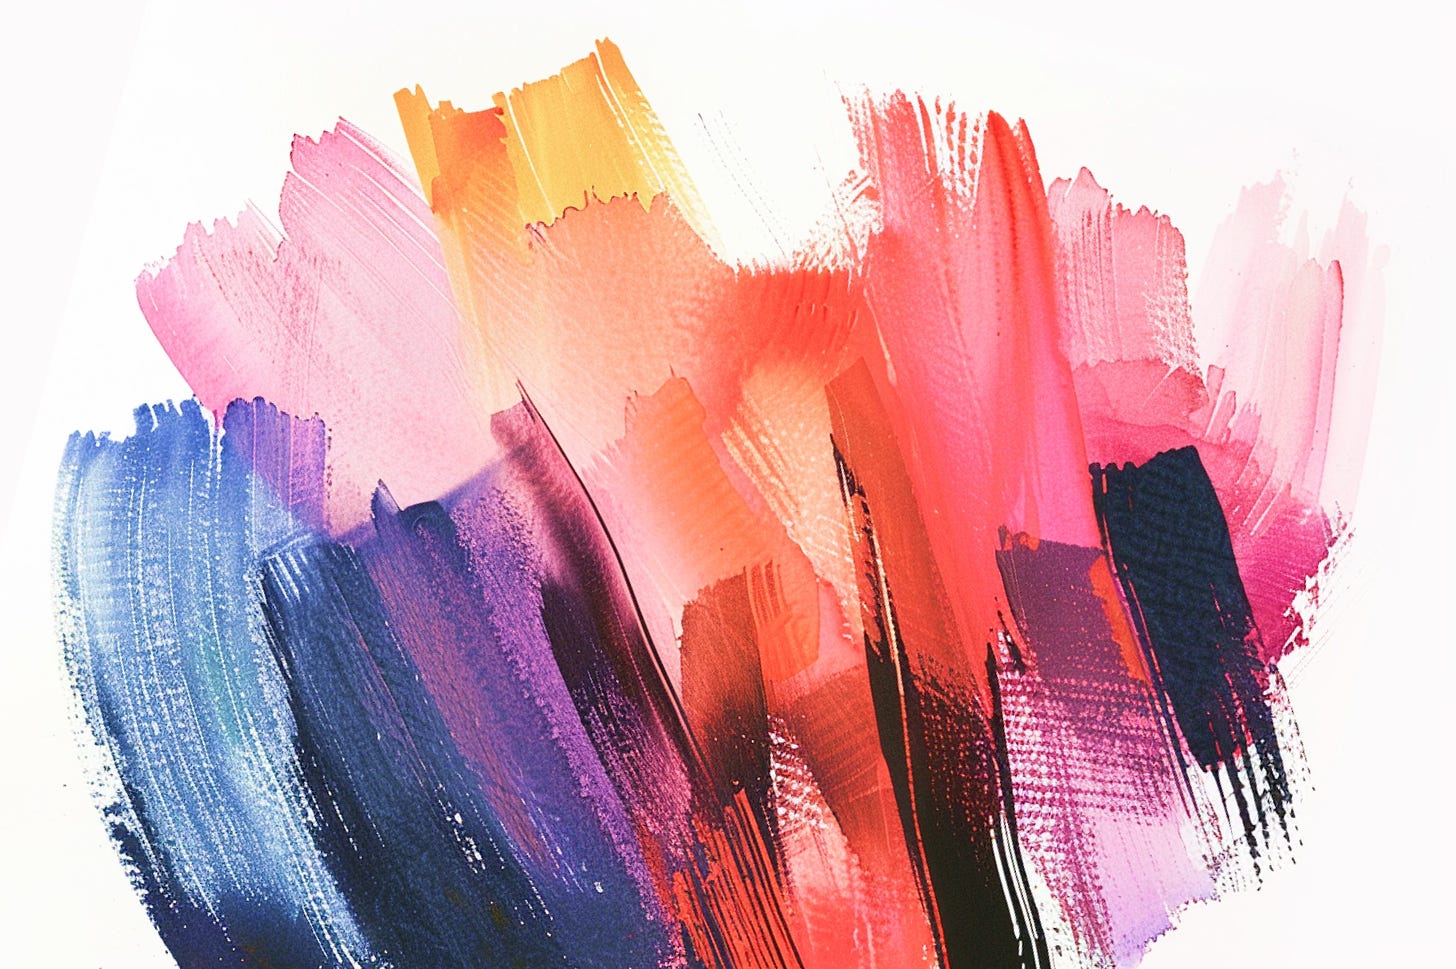 Broad abstract watercolor brush strokes in blue, purple, pink, yellow, orange, red, and magenta organically blending into each other.